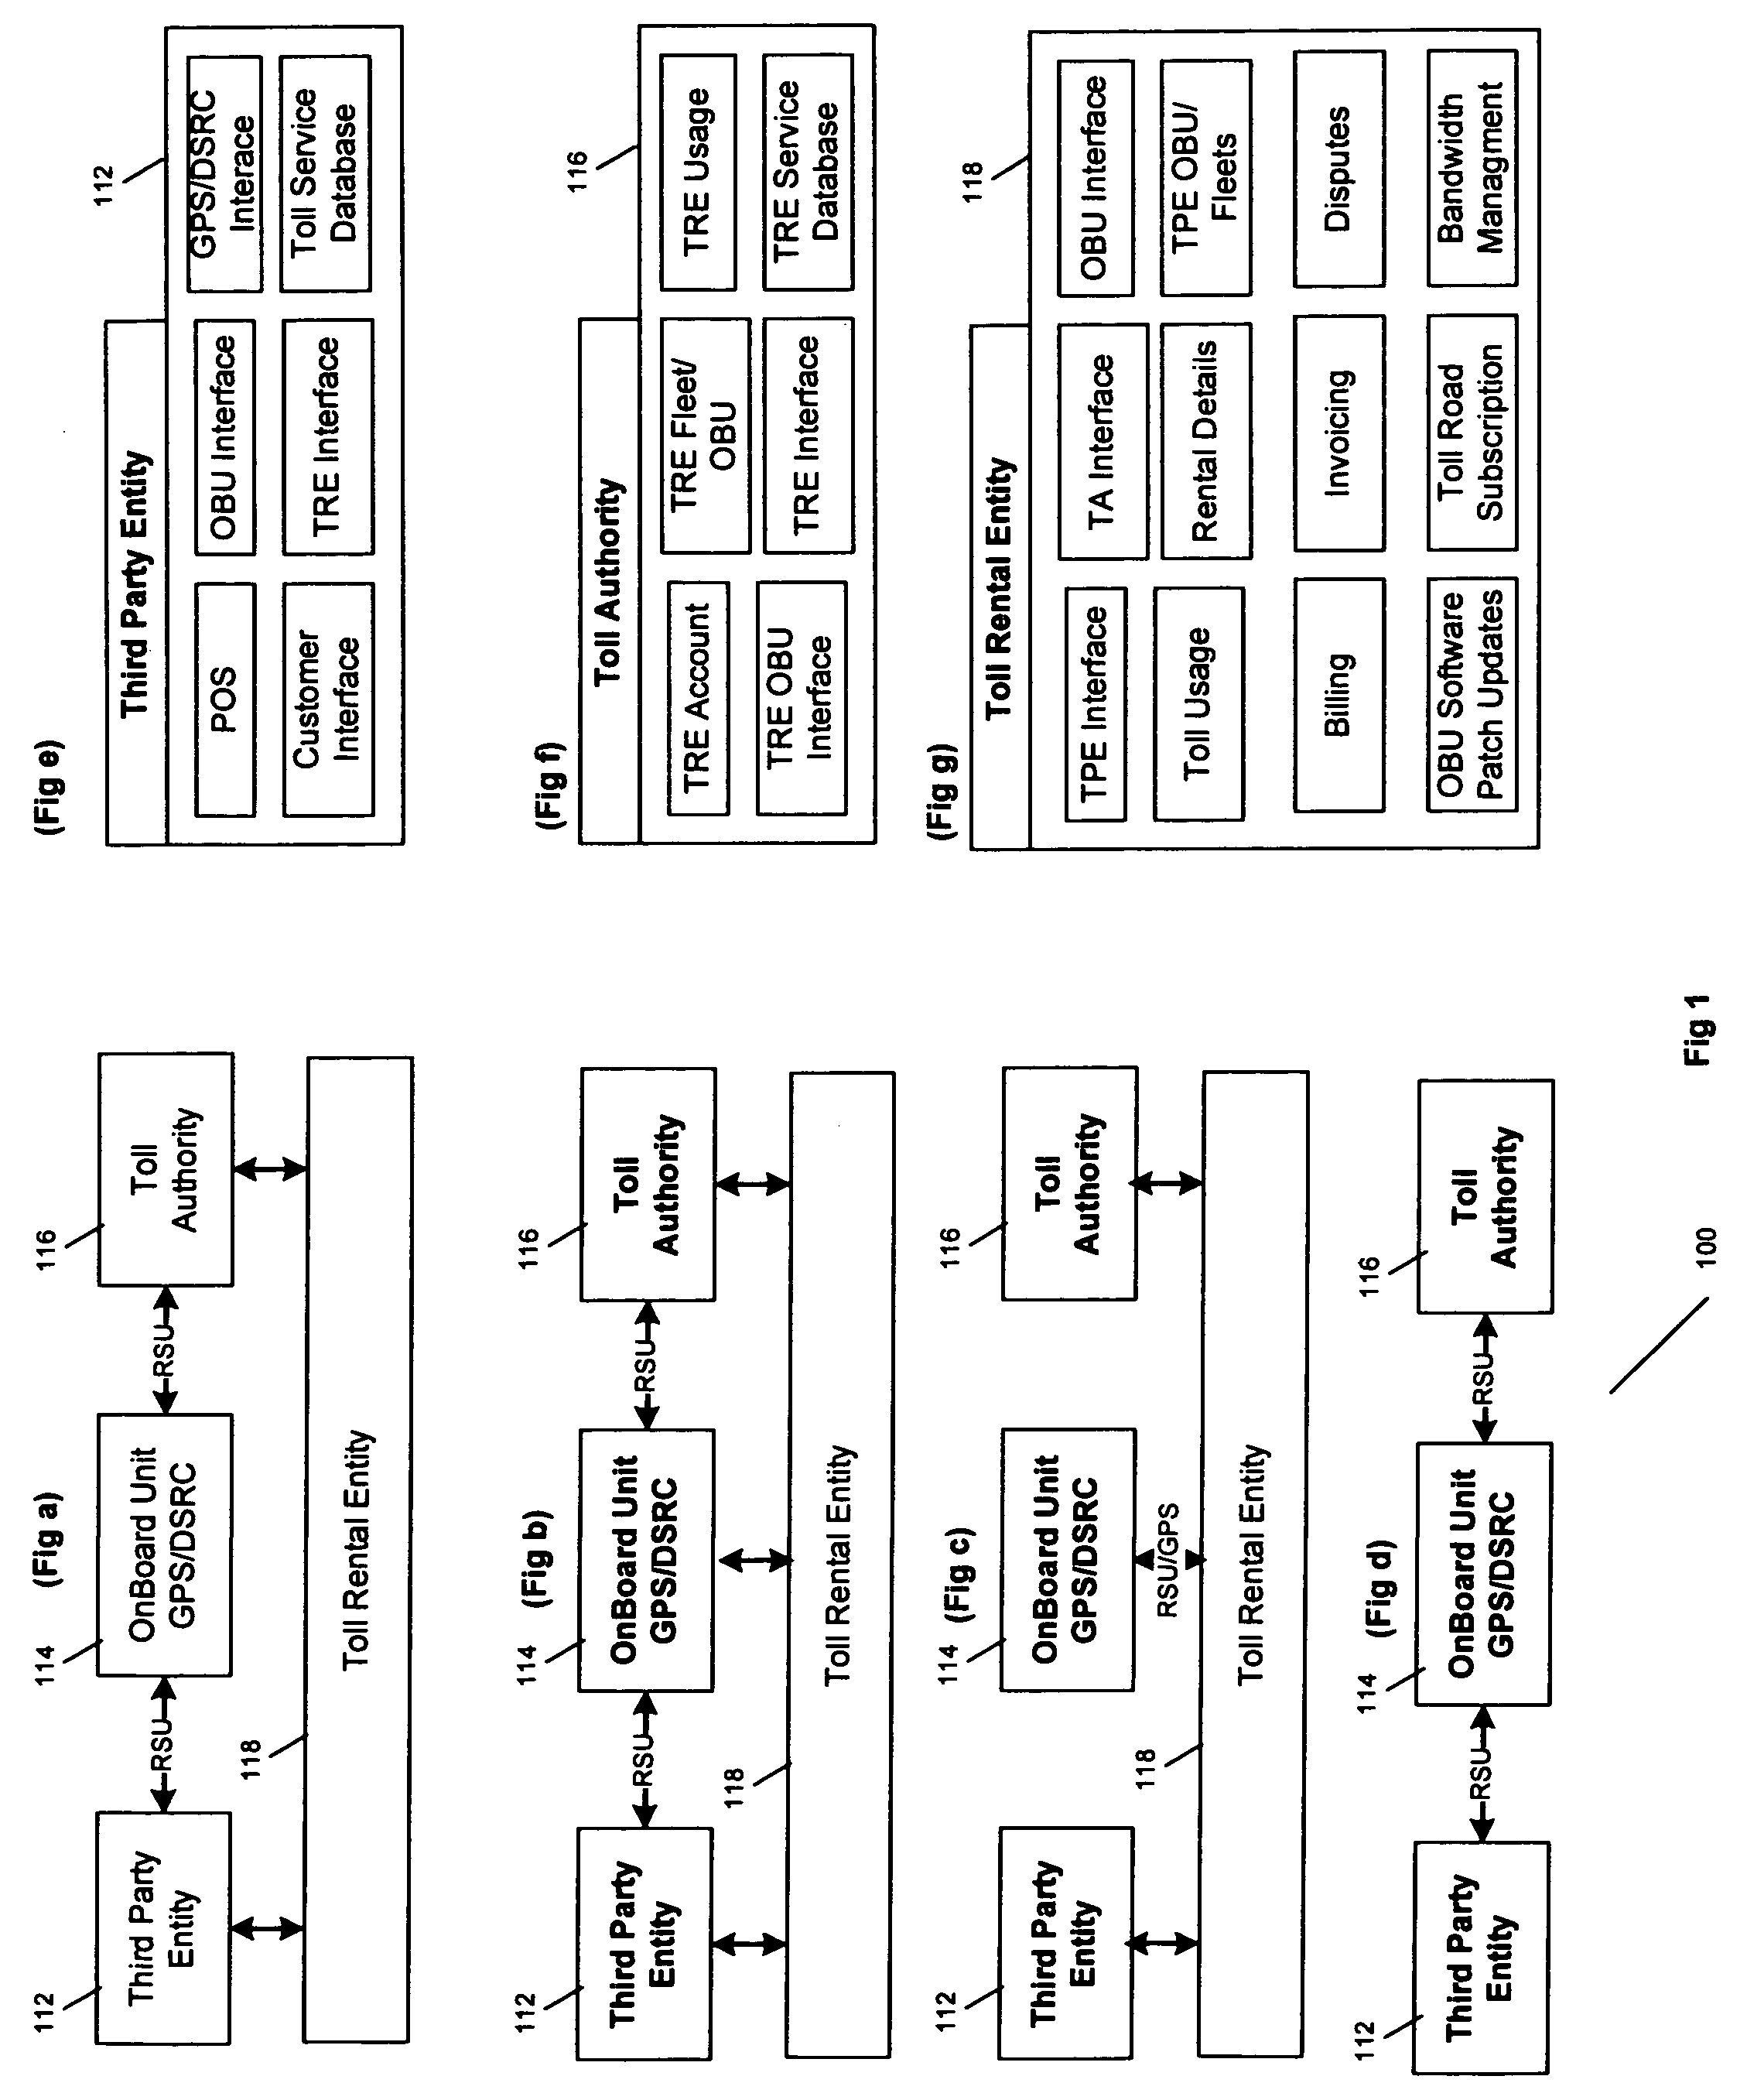 Billing a rented third party transport including an on-board unit